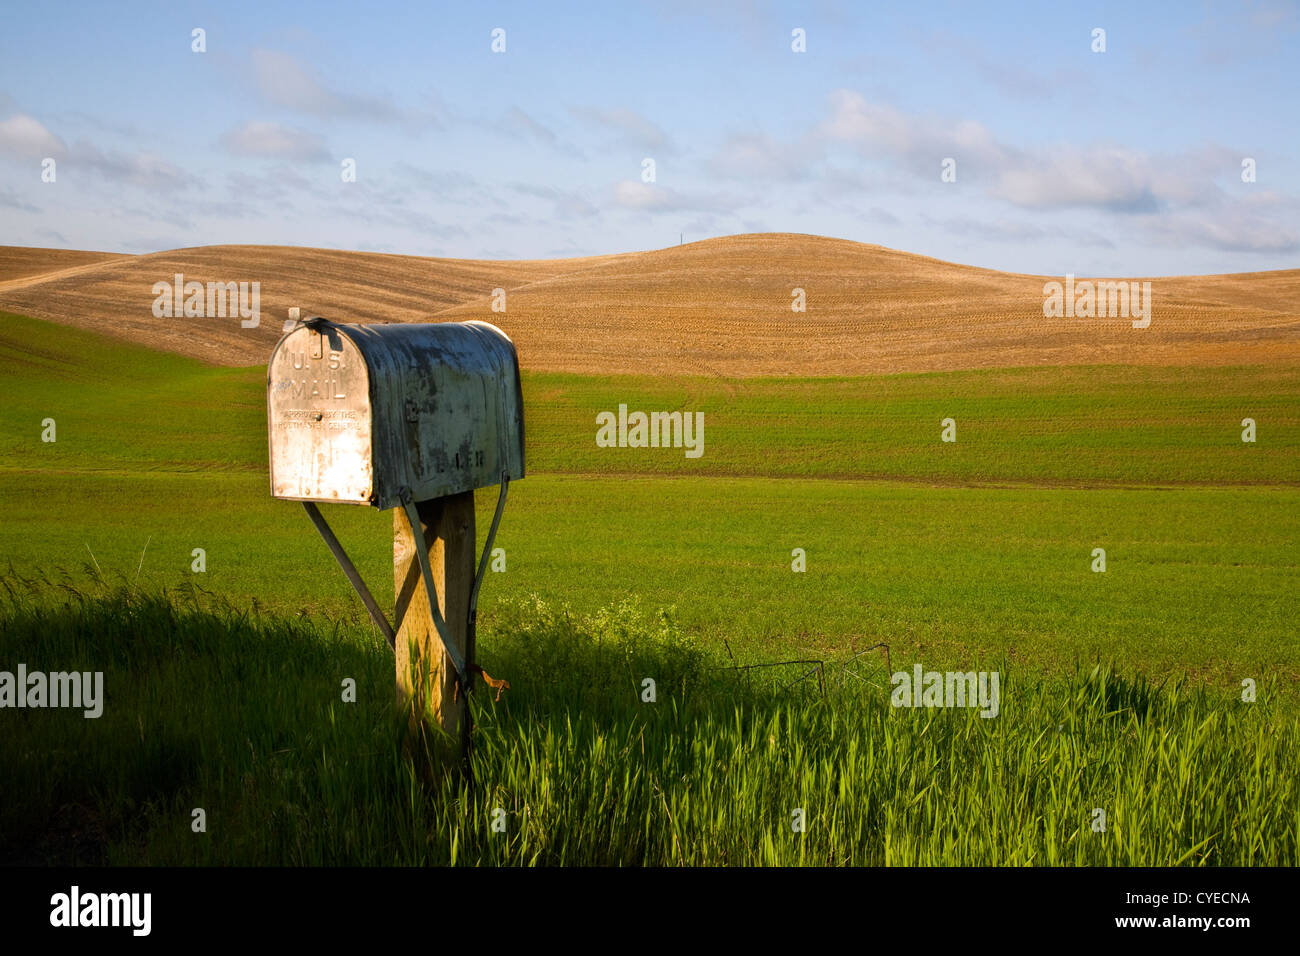 WA05484-00...WASHINGTON - Mailbox at the edge of grain fields near the town of Steptoe in the agricultural Palouse region. Stock Photo